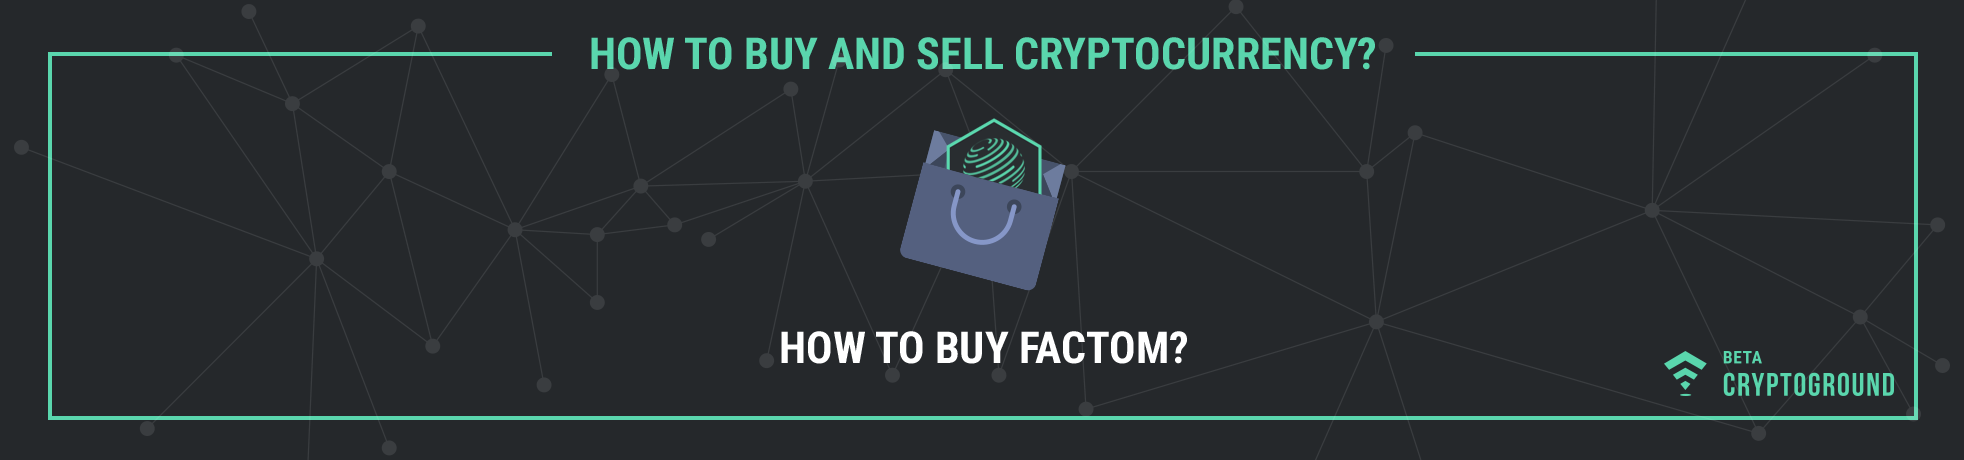 How to Buy Factom?